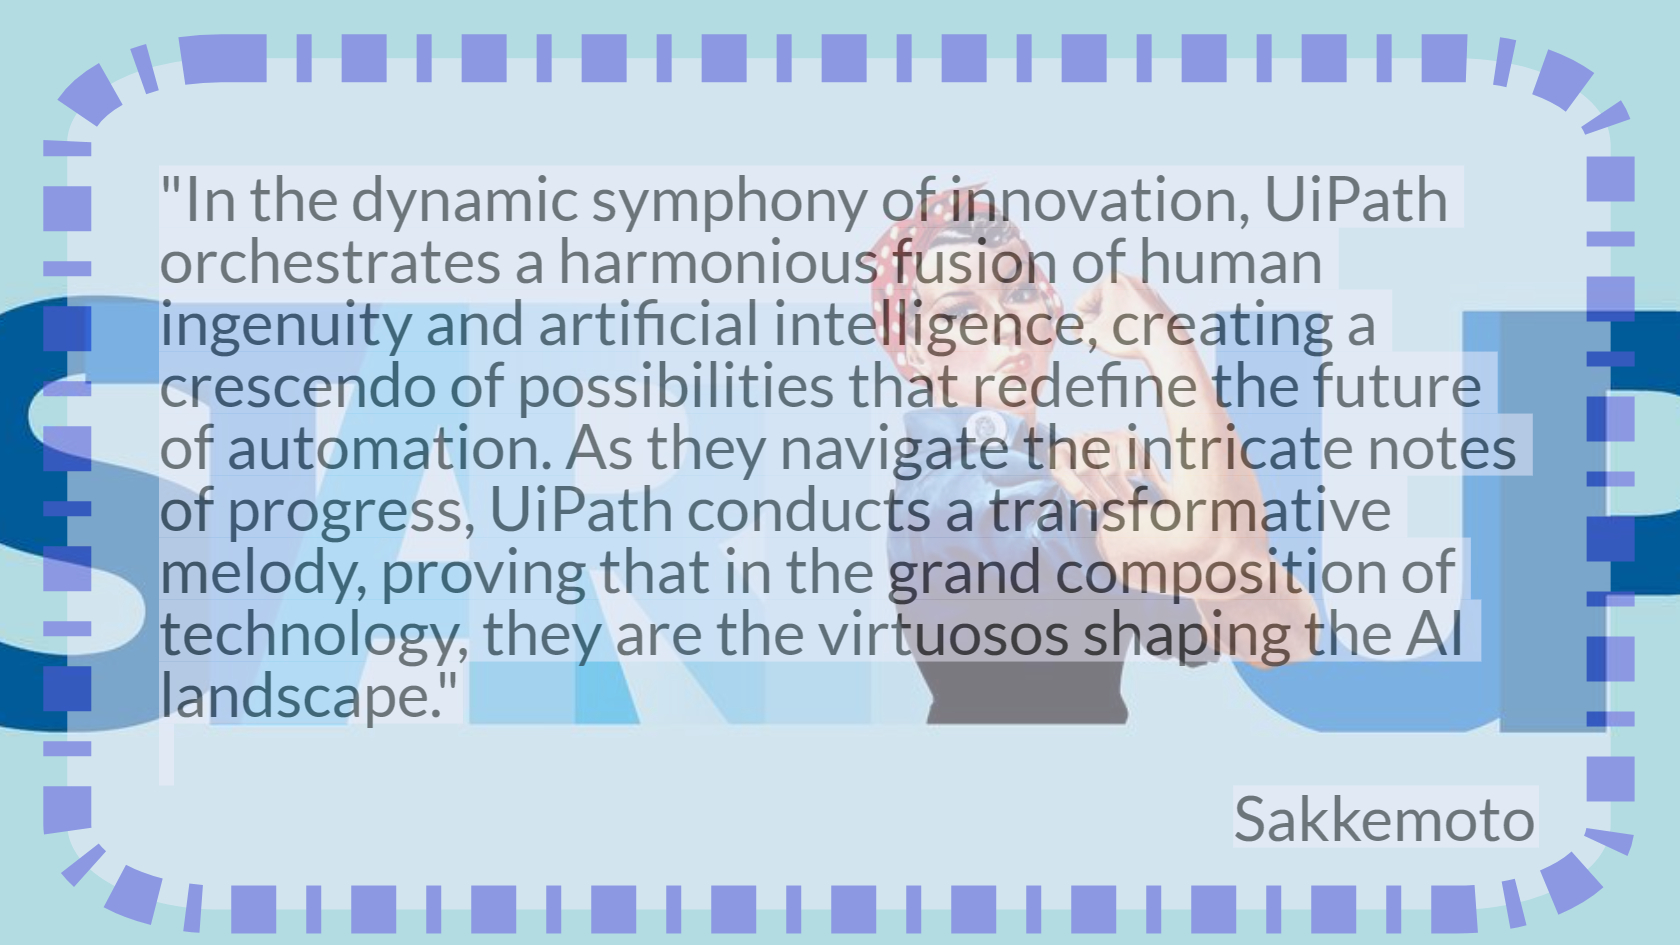 In the dynamic symphony of innovation, UiPath orchestrates a harmonious fusion of human ingenuity and artificial intelligence,